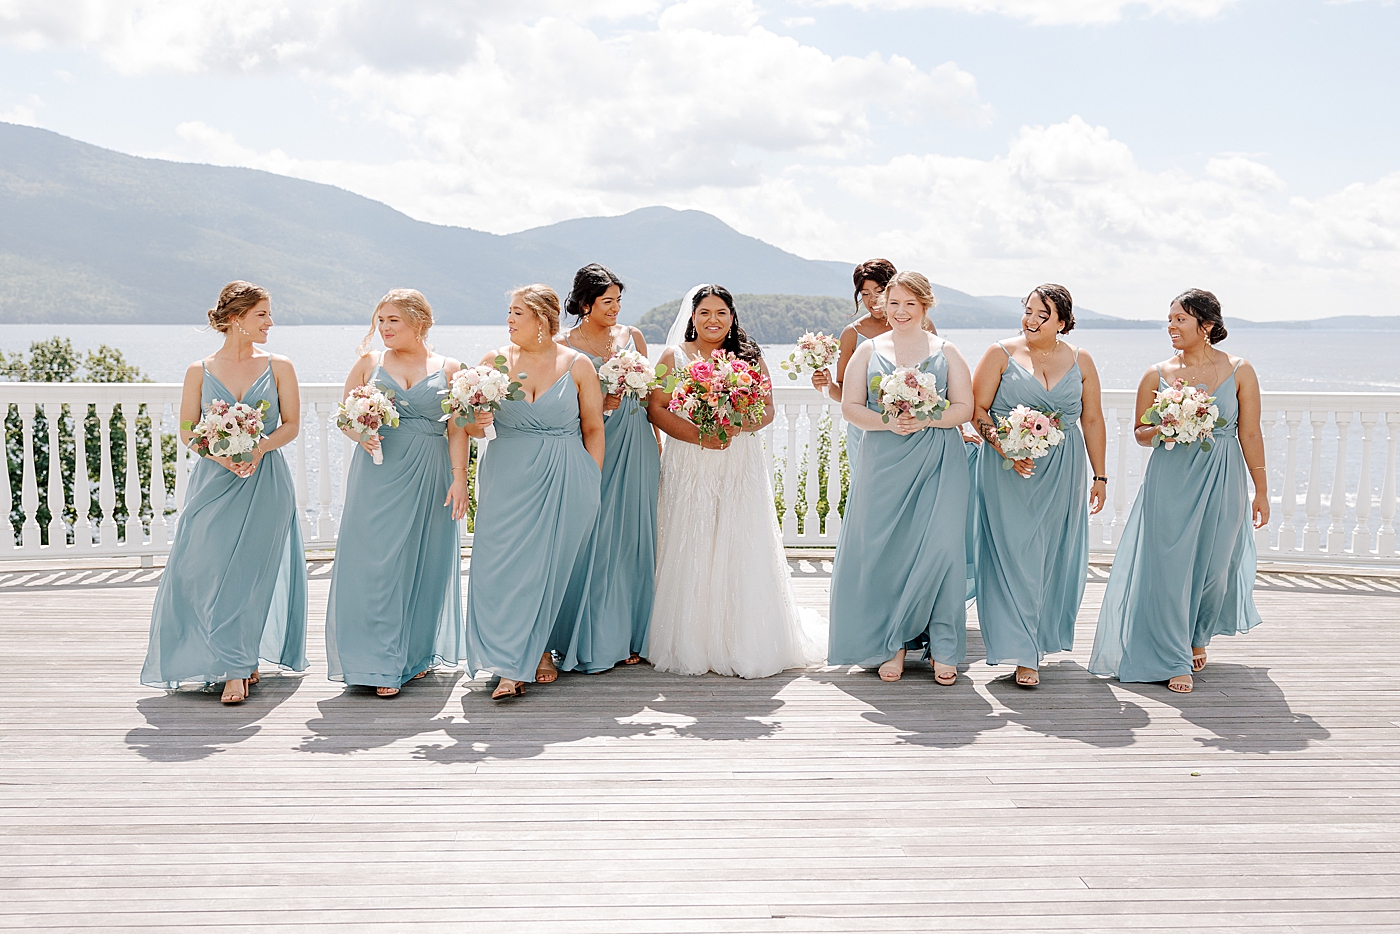 Informal portraits of a bride and her bridesmaids in blue walking towards the camera | Image by Hope Helmuth Photography